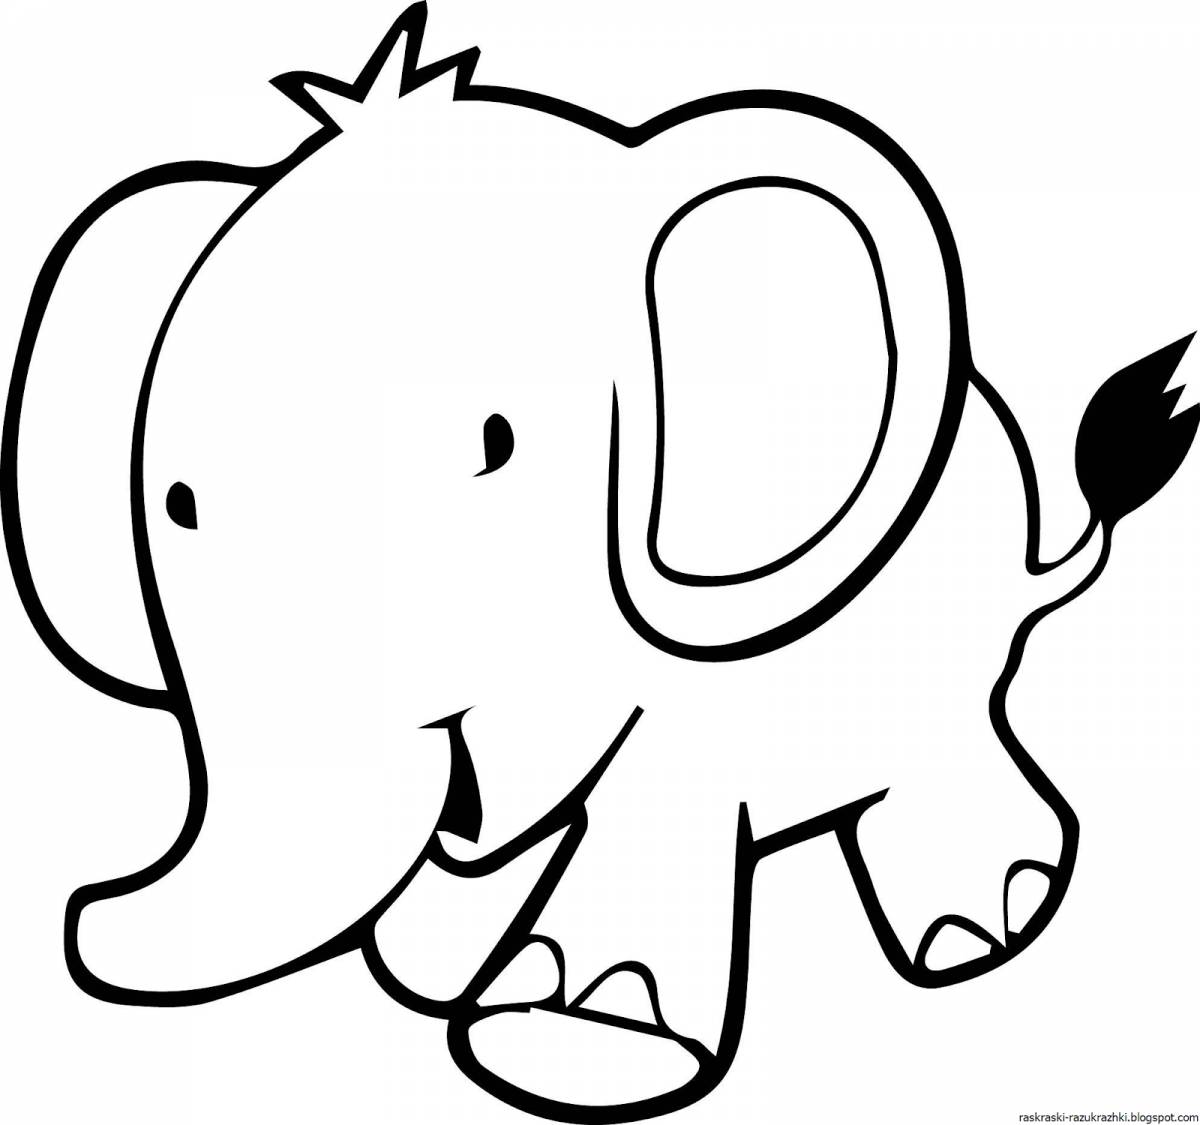 Majestic elephant coloring book